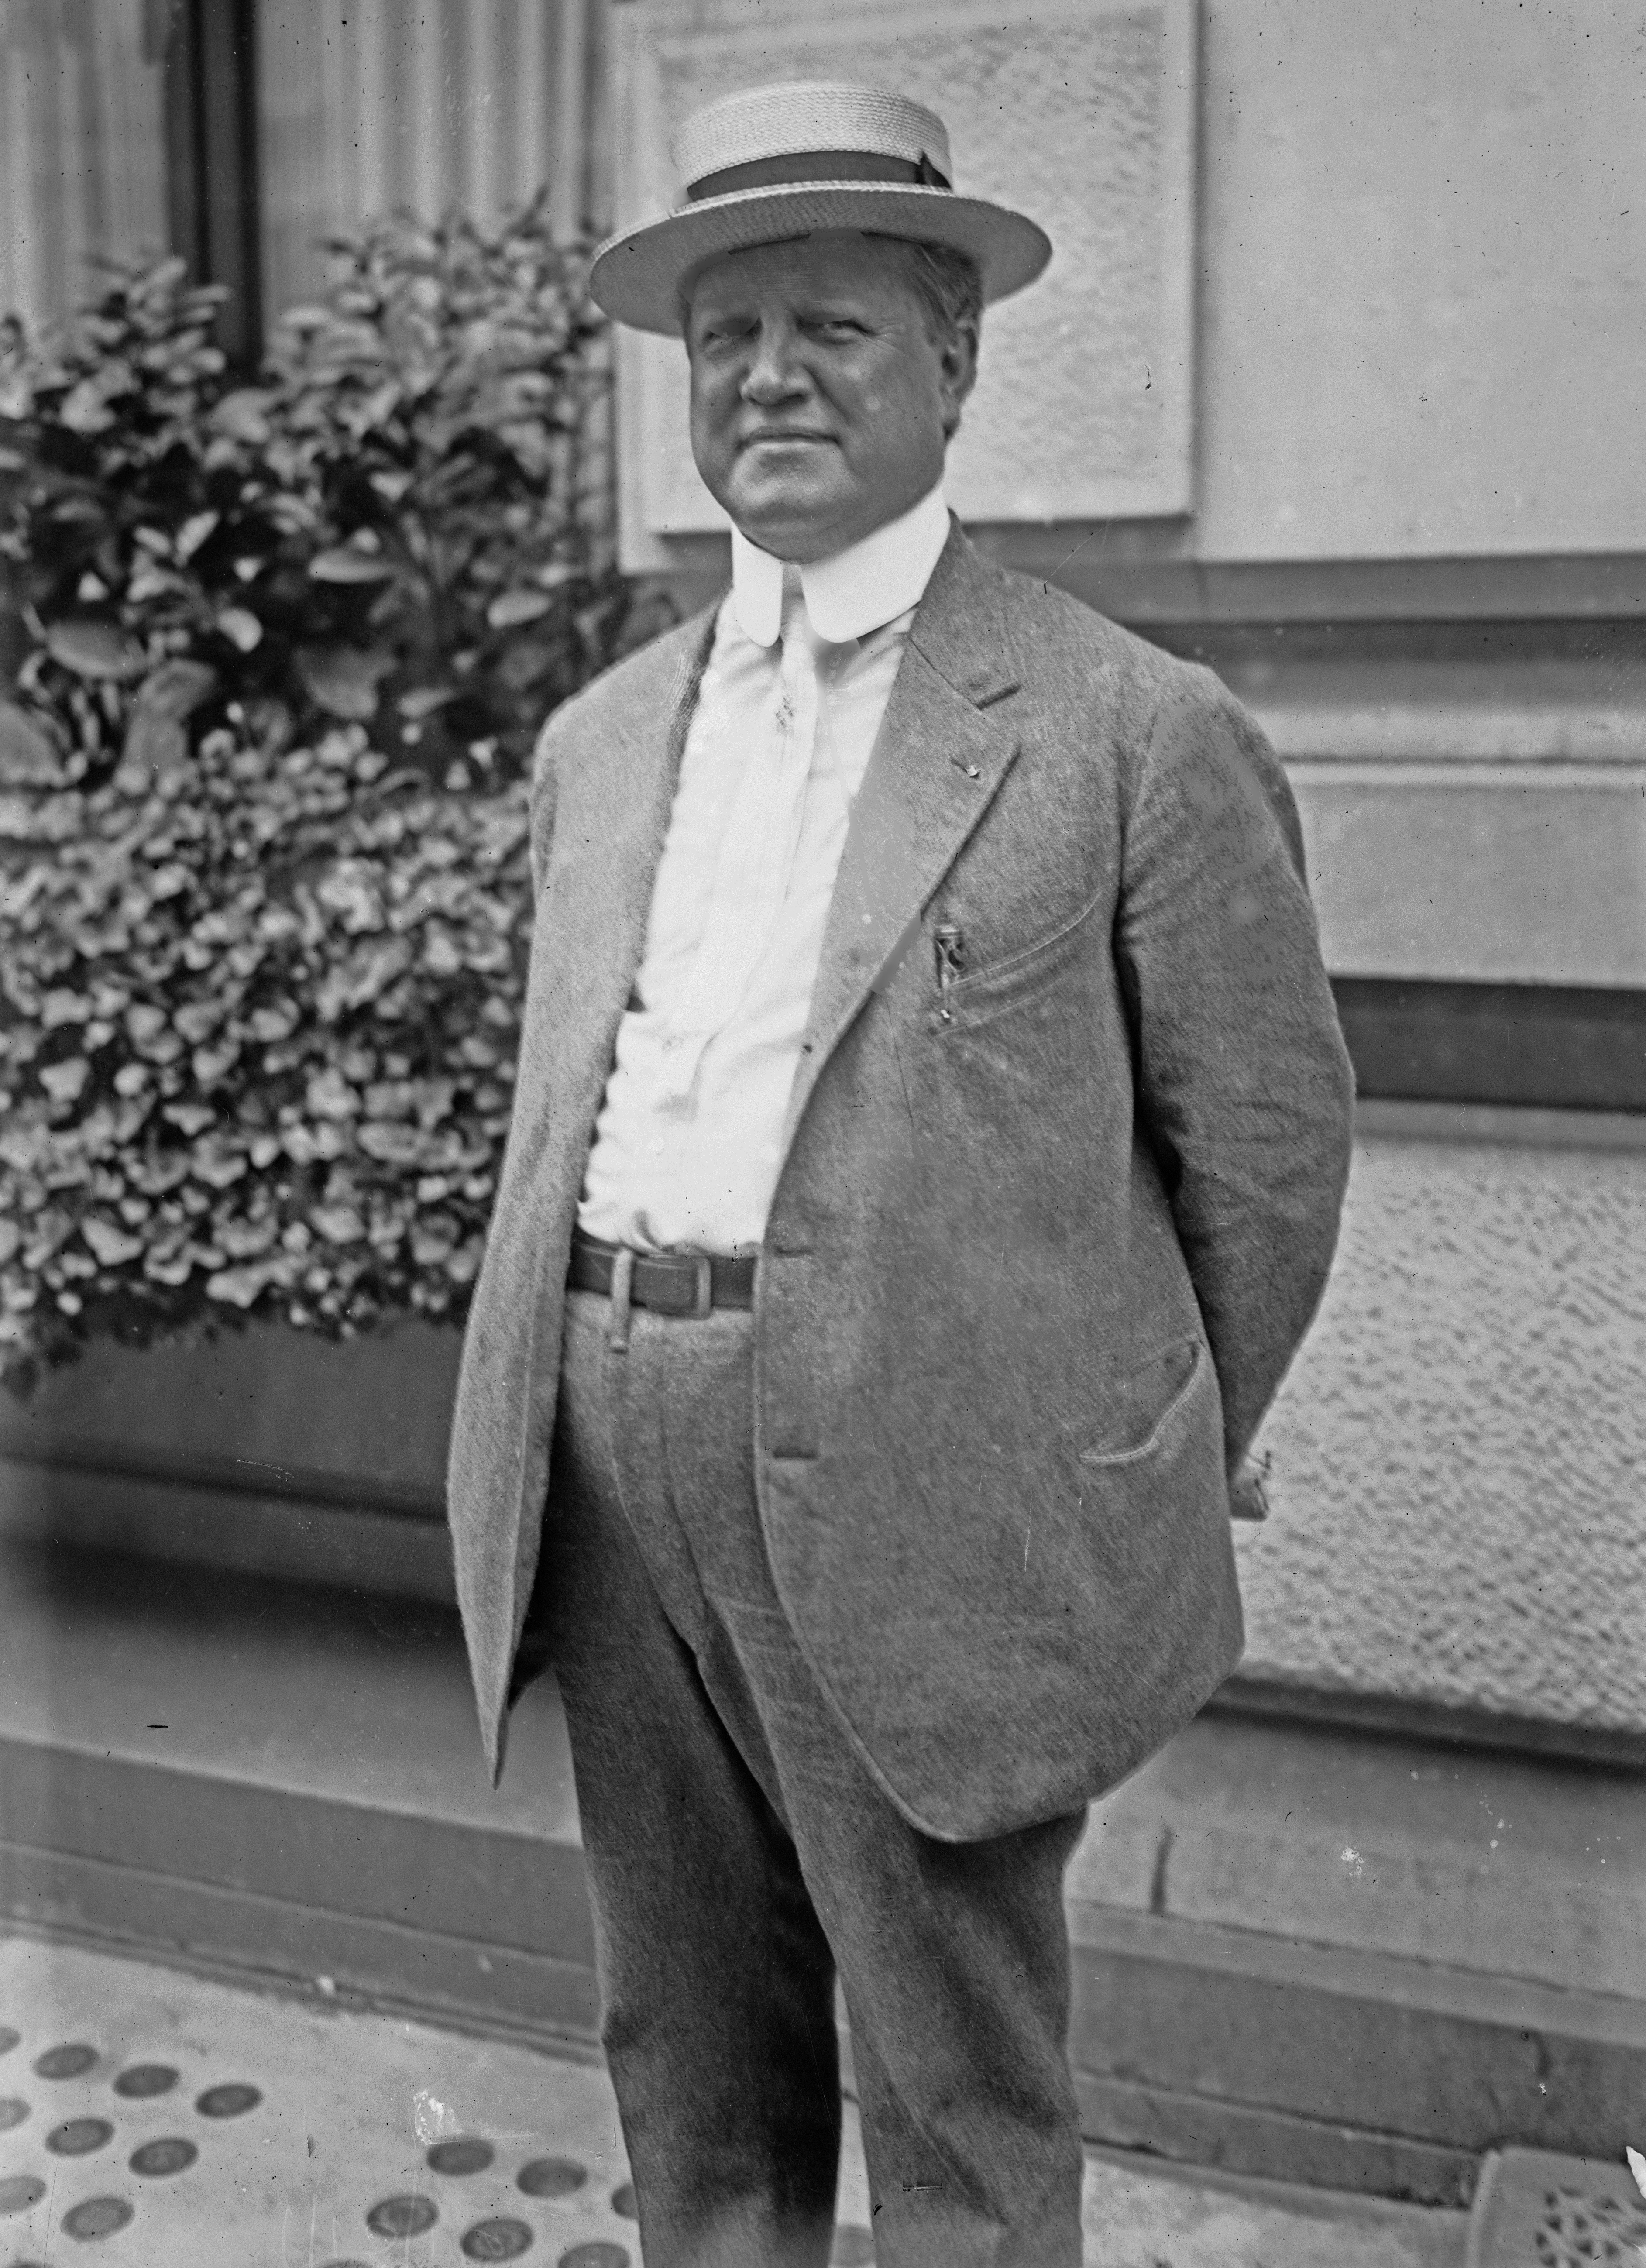 Charles Hercules Ebbets, Sr. (1859-1925), an American sports manager who owned the Brooklyn Dodgers from 1902 to 1925 ca. 1915